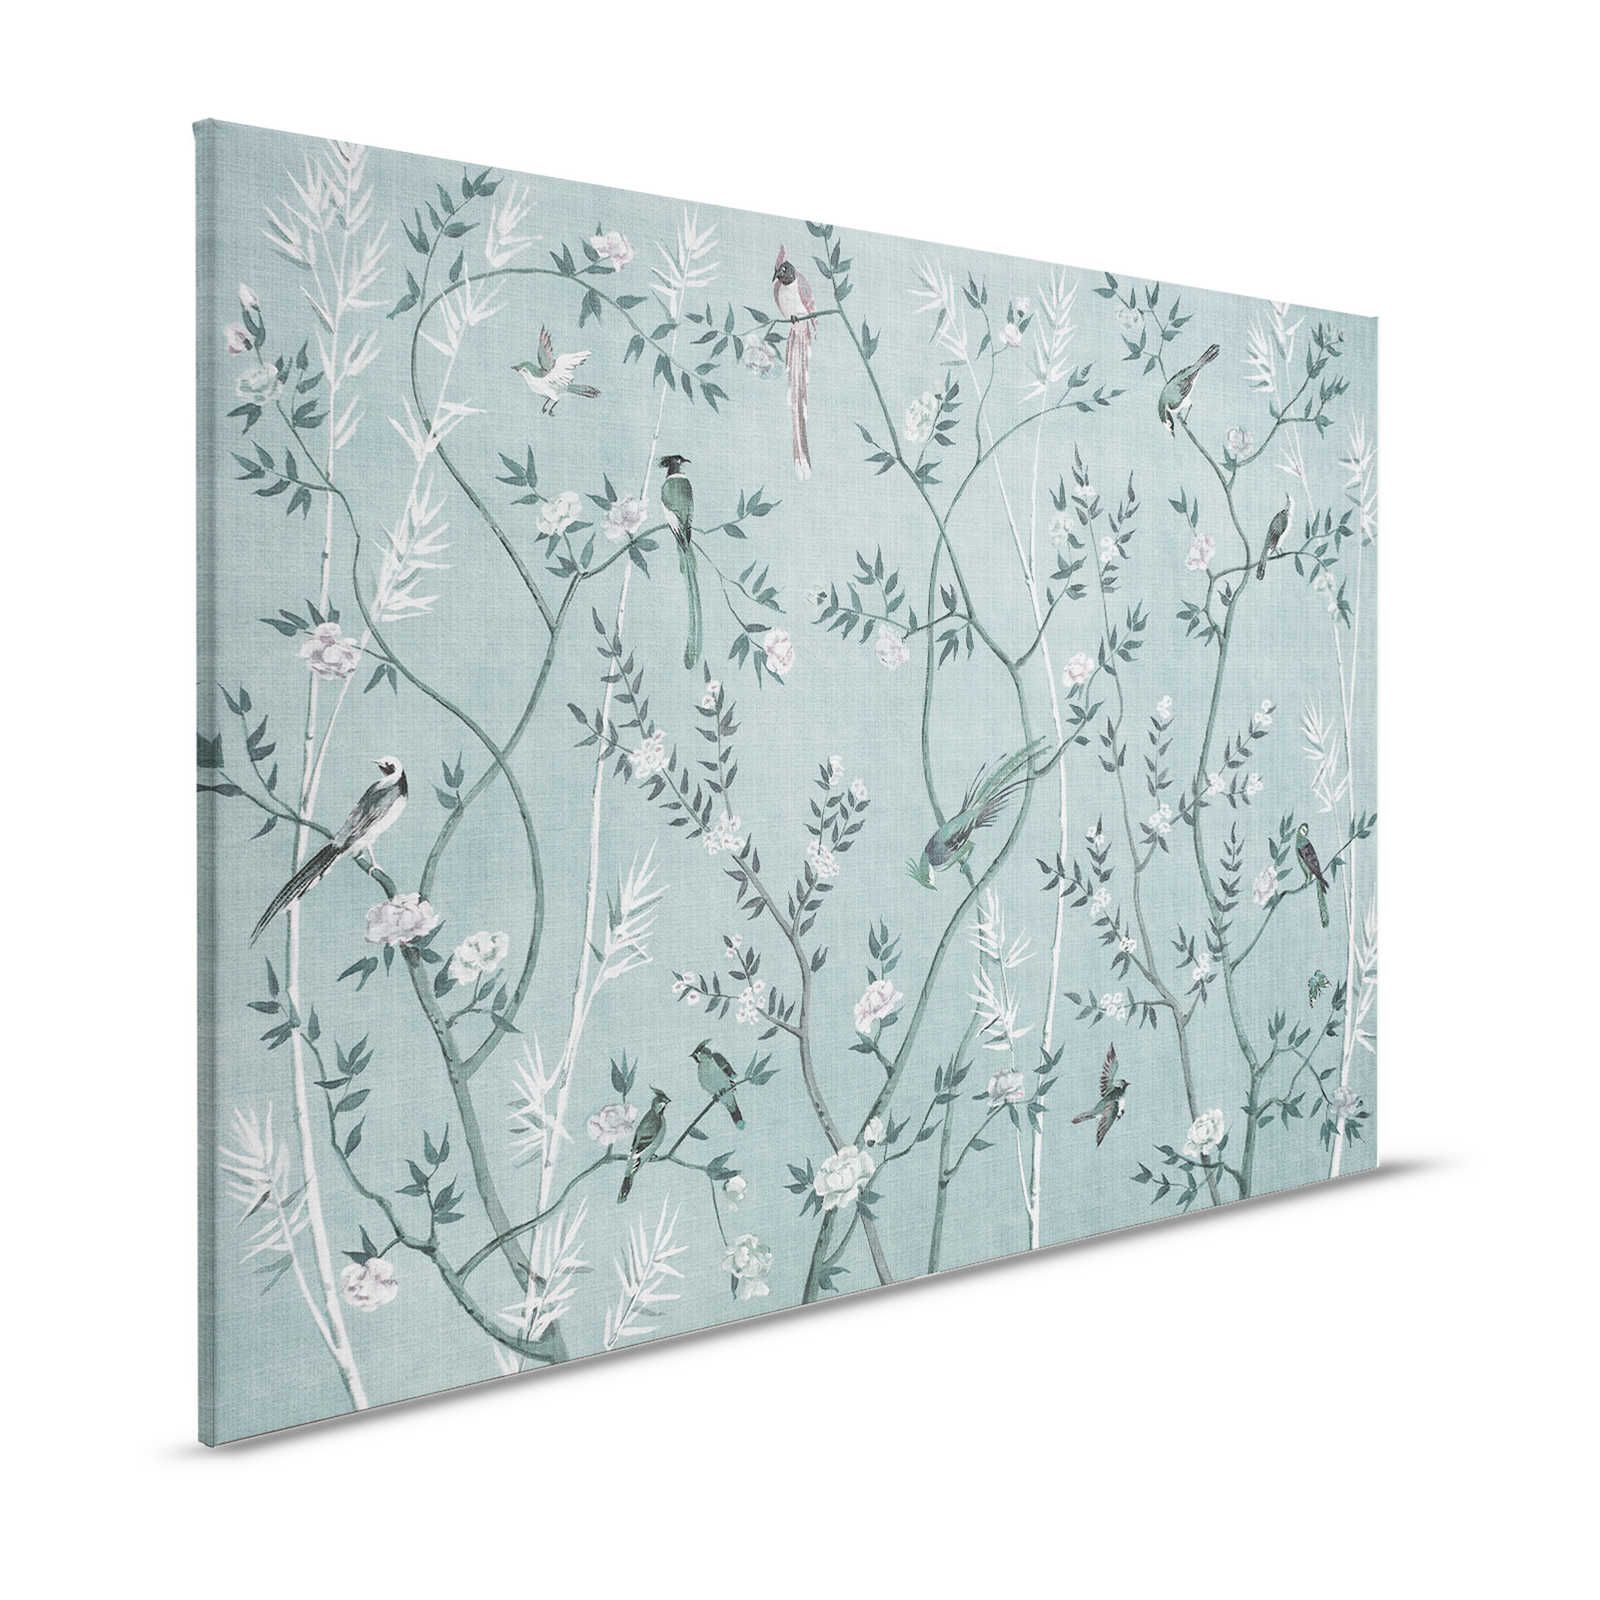 Tea Room 1 - Canvas painting Birds & Blossoms Design in Petrol & White - 1.20 m x 0.80 m
